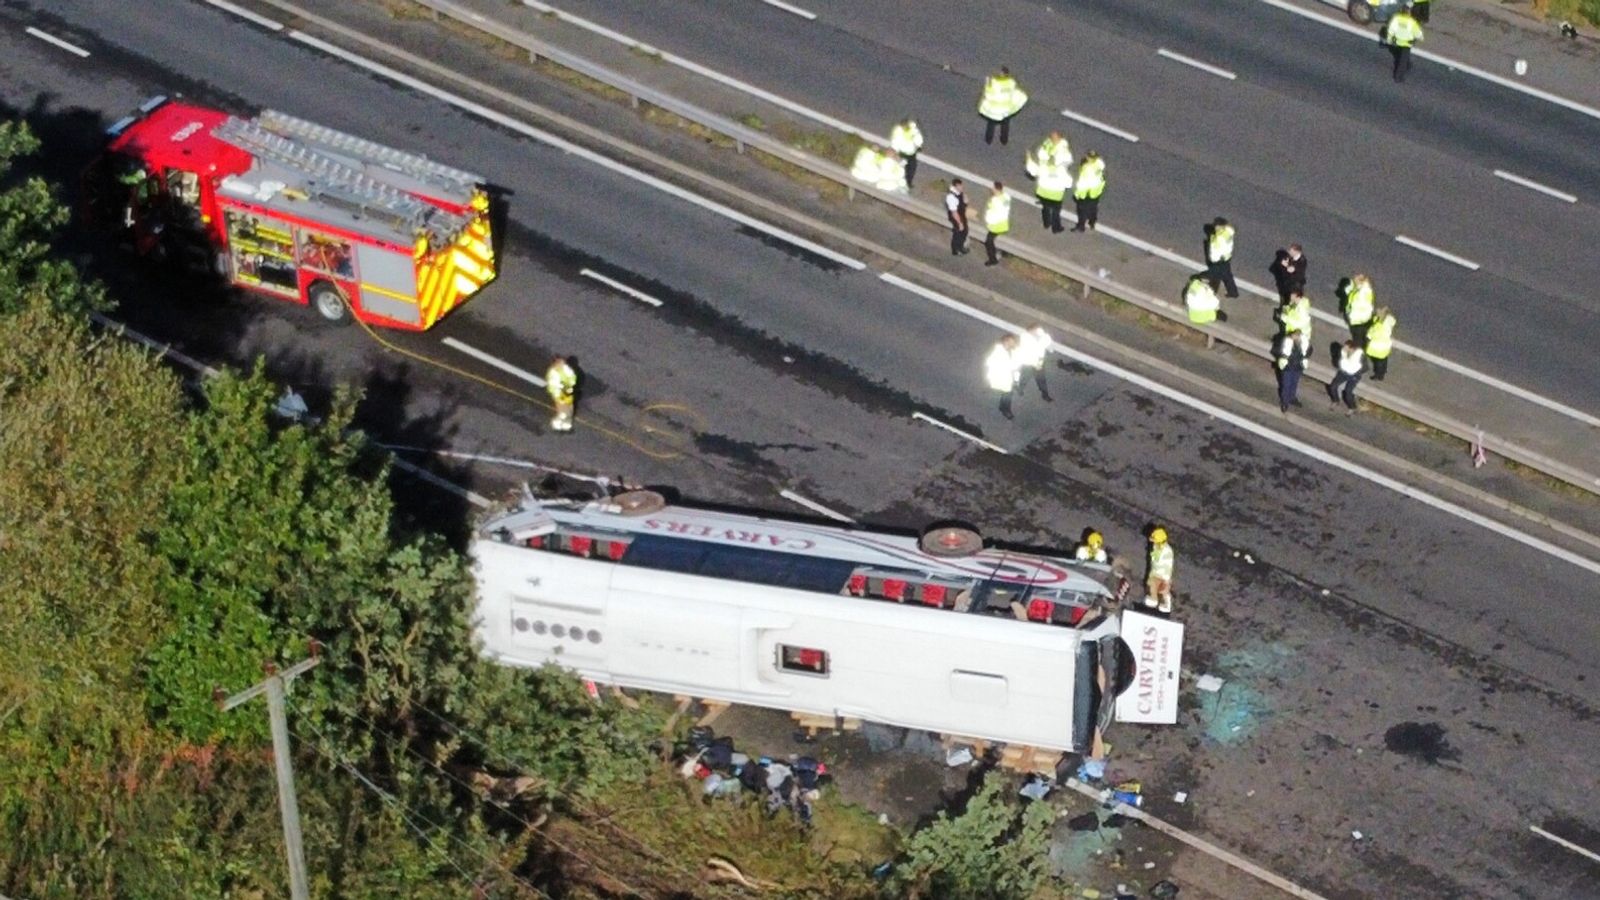 Merseyside: Girl, 14, and driver killed after school bus overturns on motorway